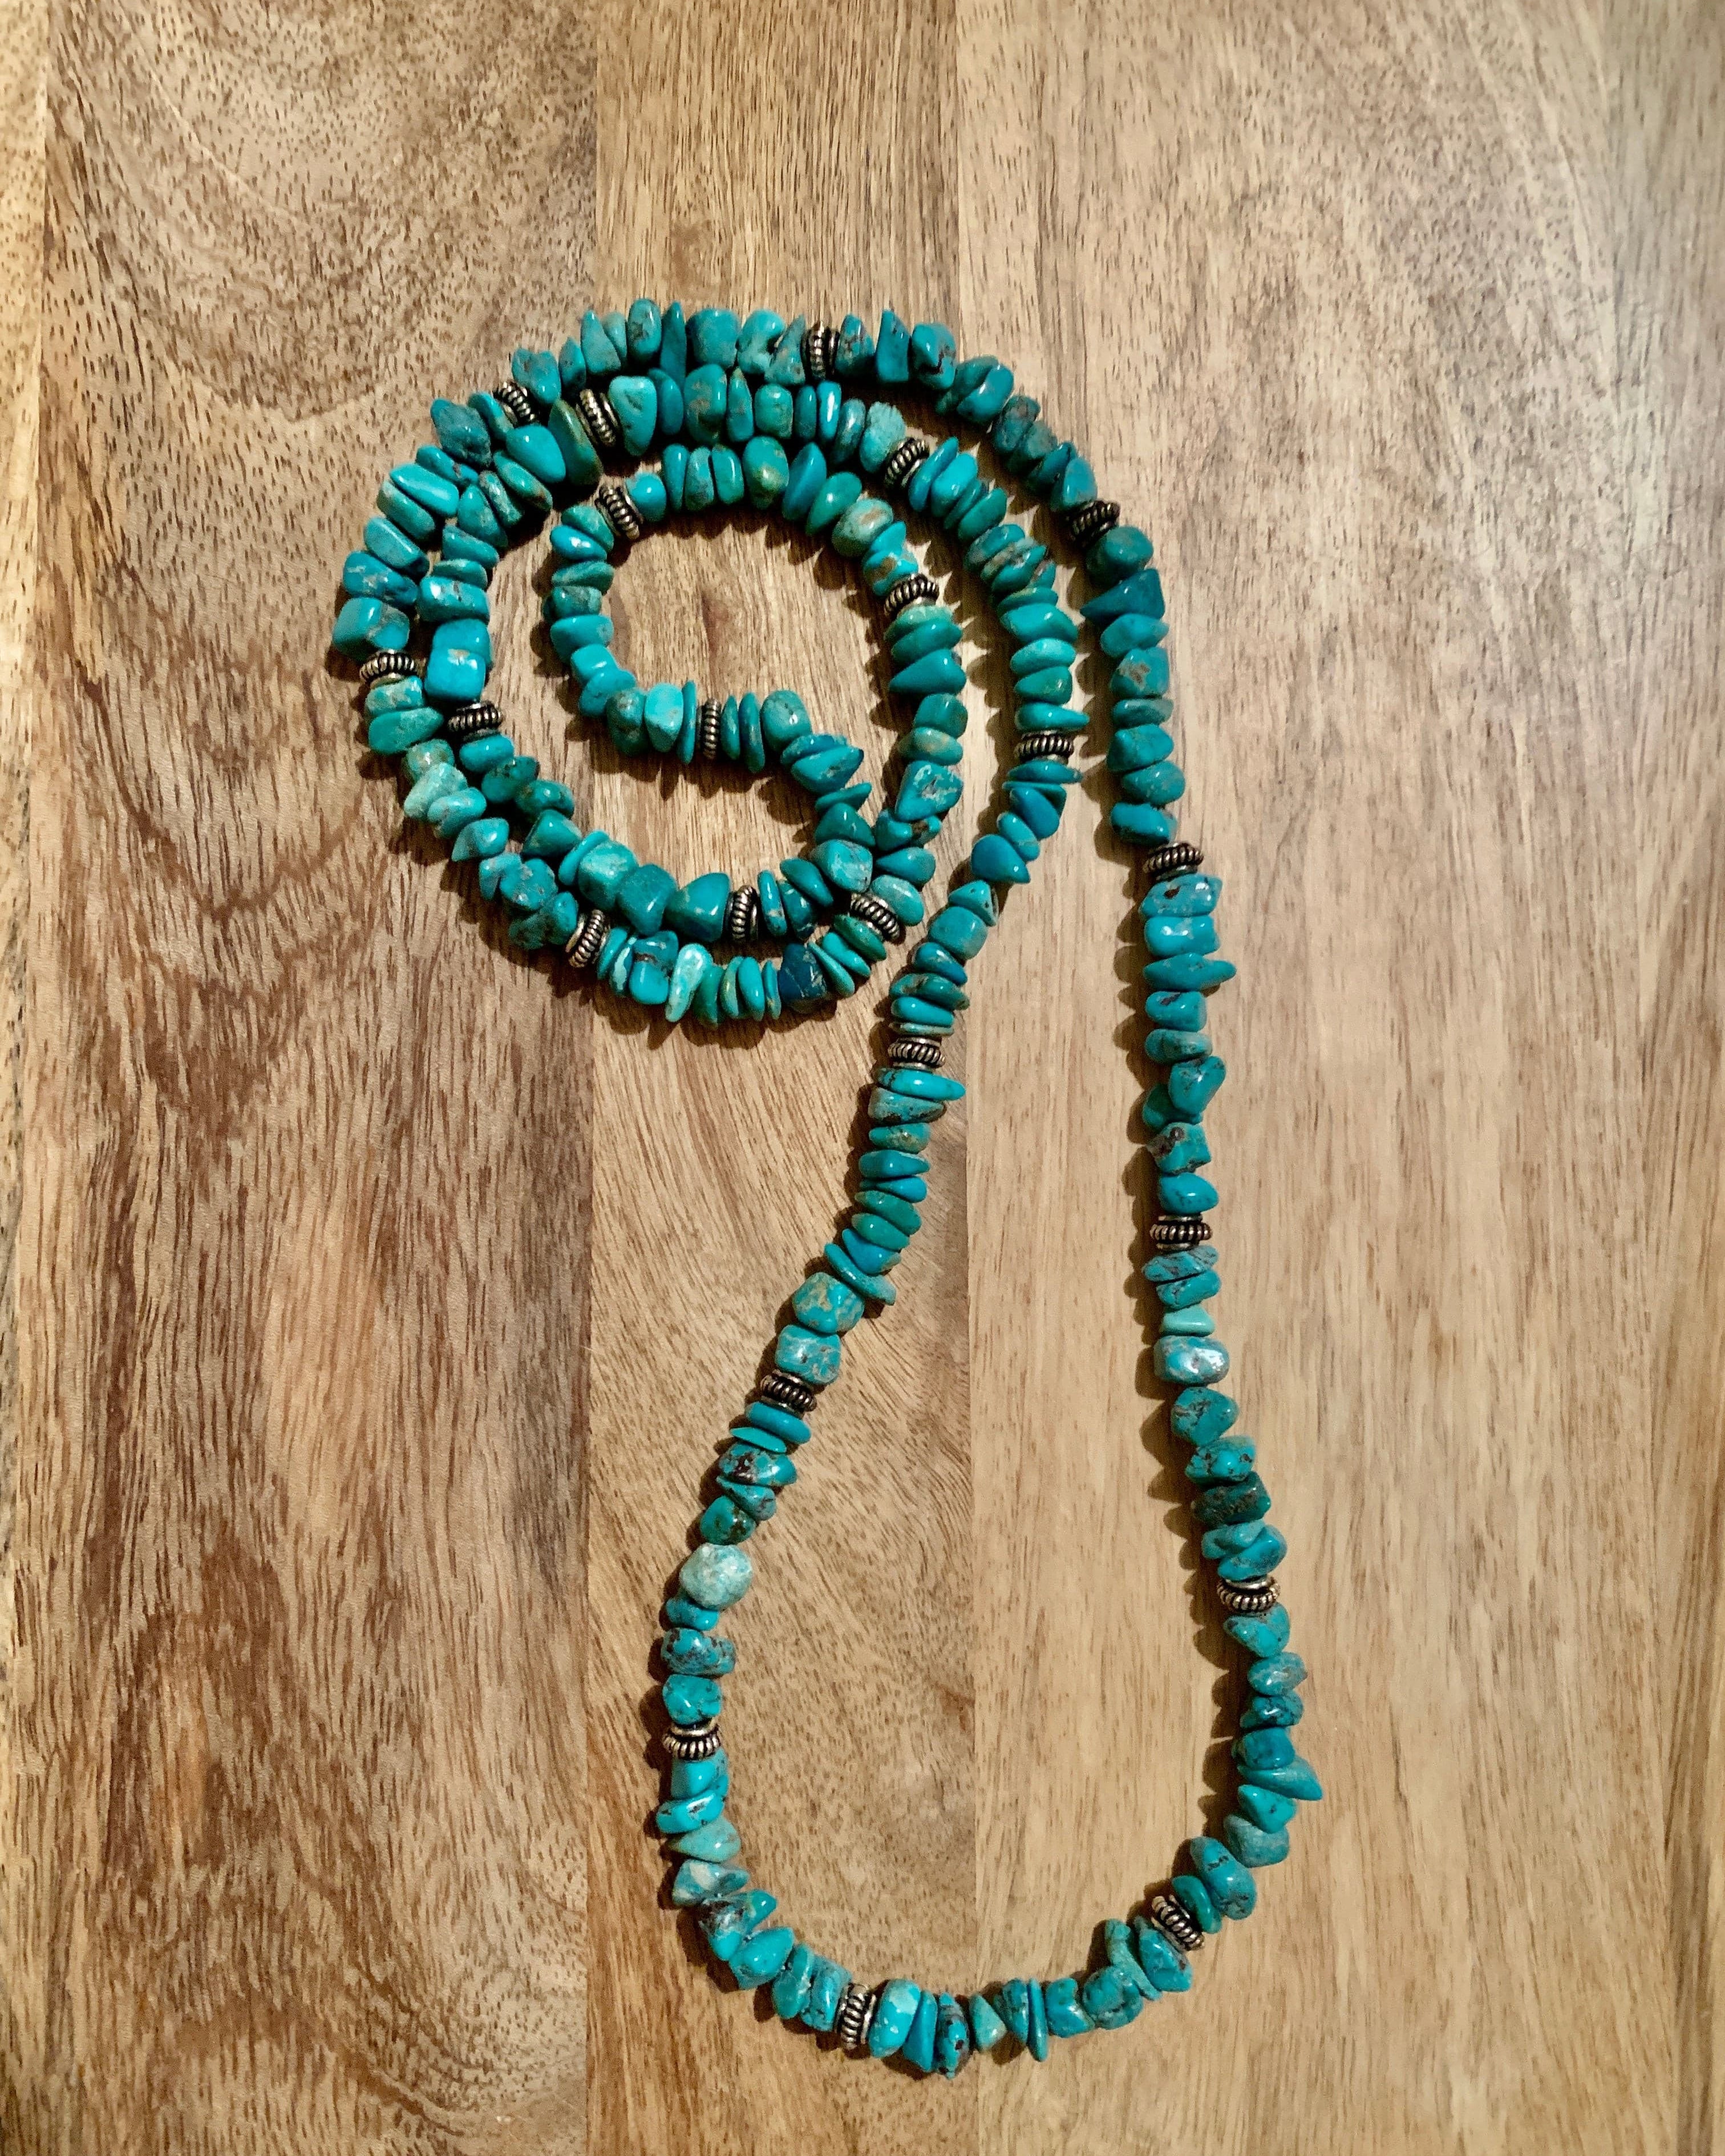 Genuine Turquoise & Sterling Silver Long Beaded Necklace.